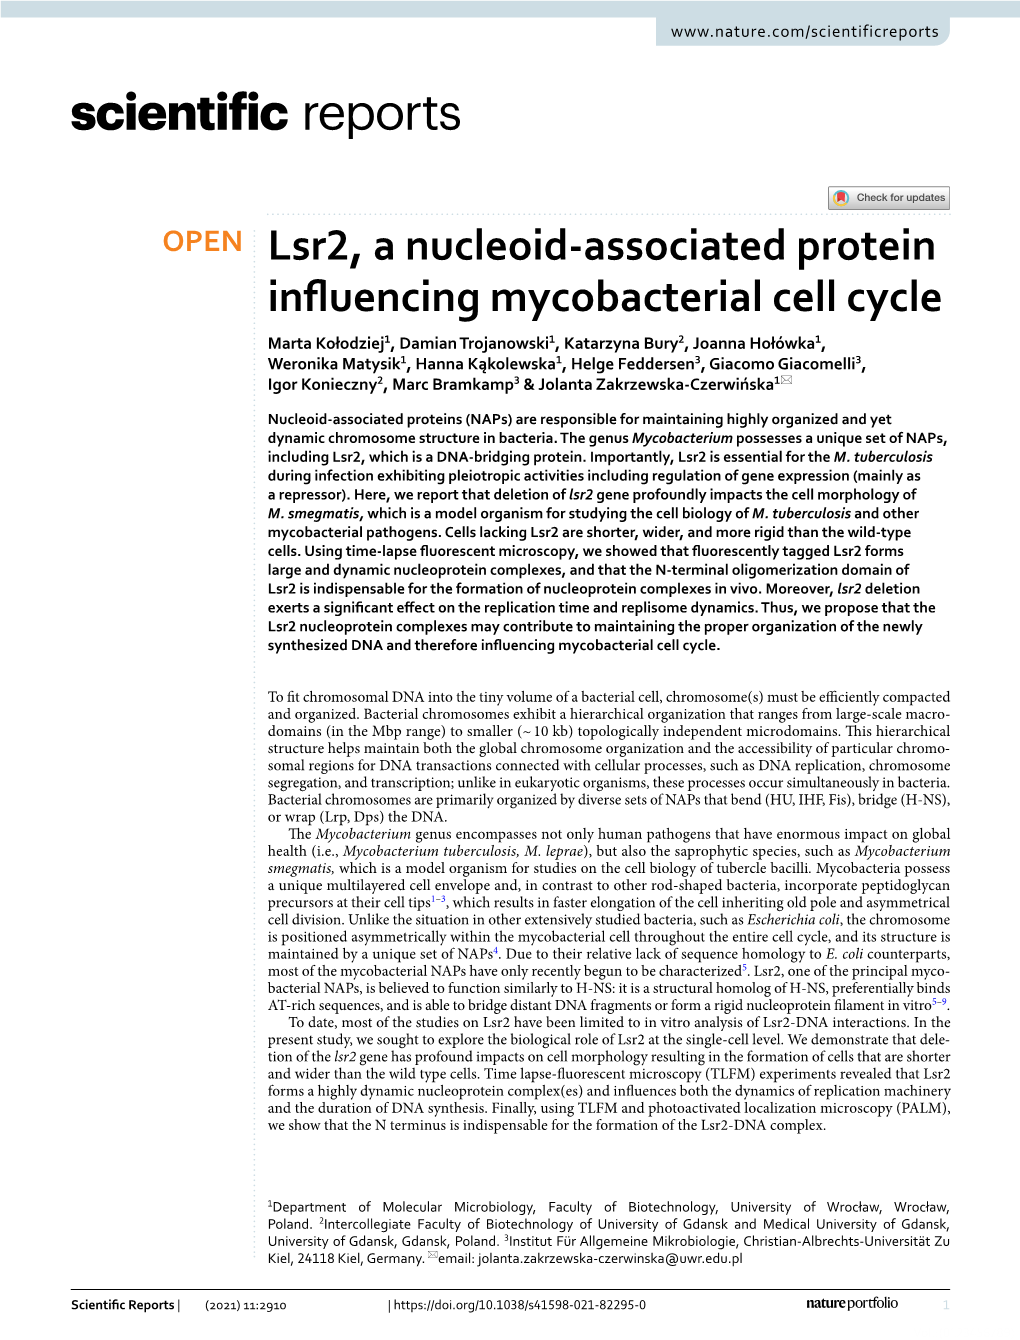 Lsr2, a Nucleoid-Associated Protein Influencing Mycobacterial Cell Cycle